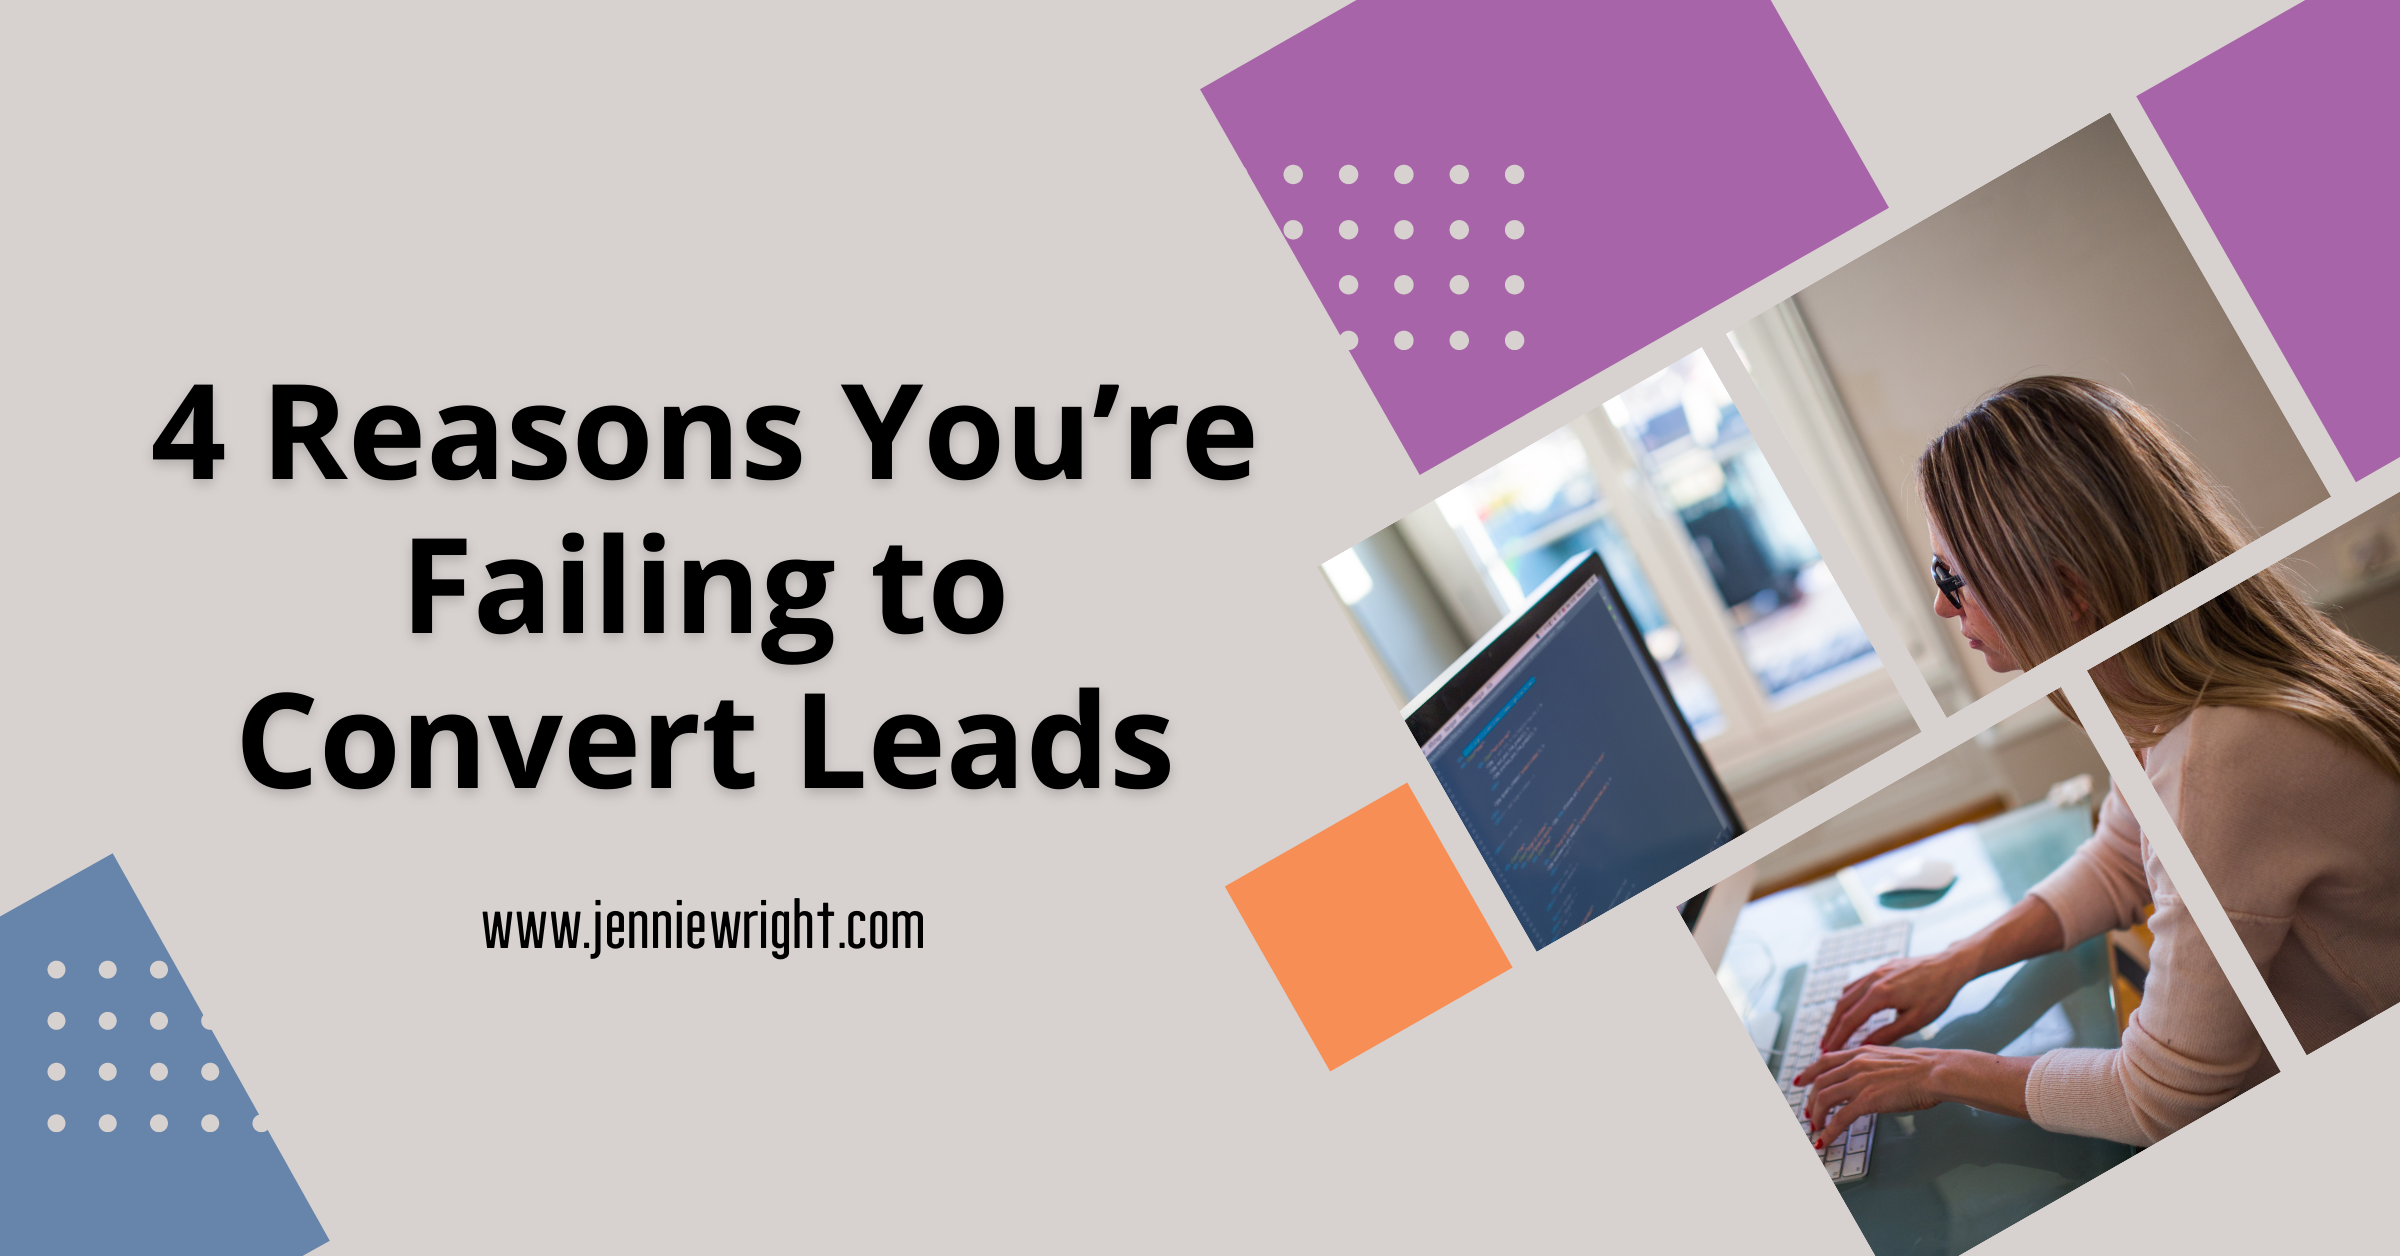 Convert More Leads with 4 Easy Steps